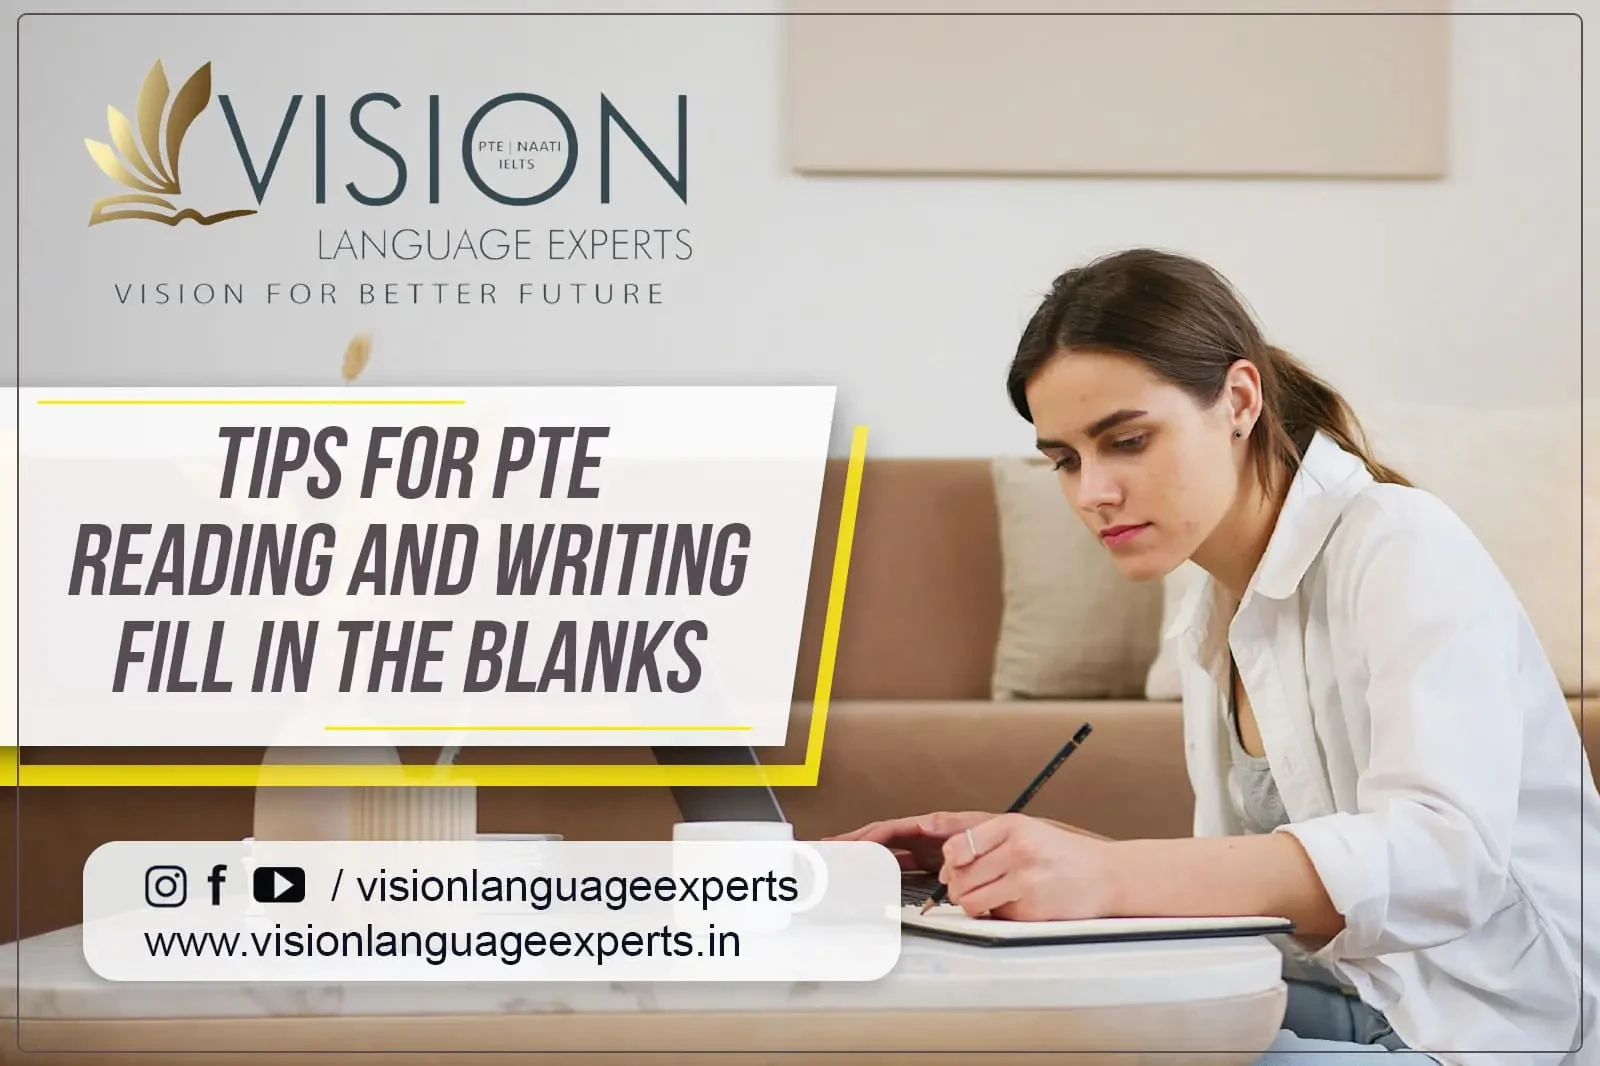 Tips for PTE Reading and Writing Fill in the Blanks